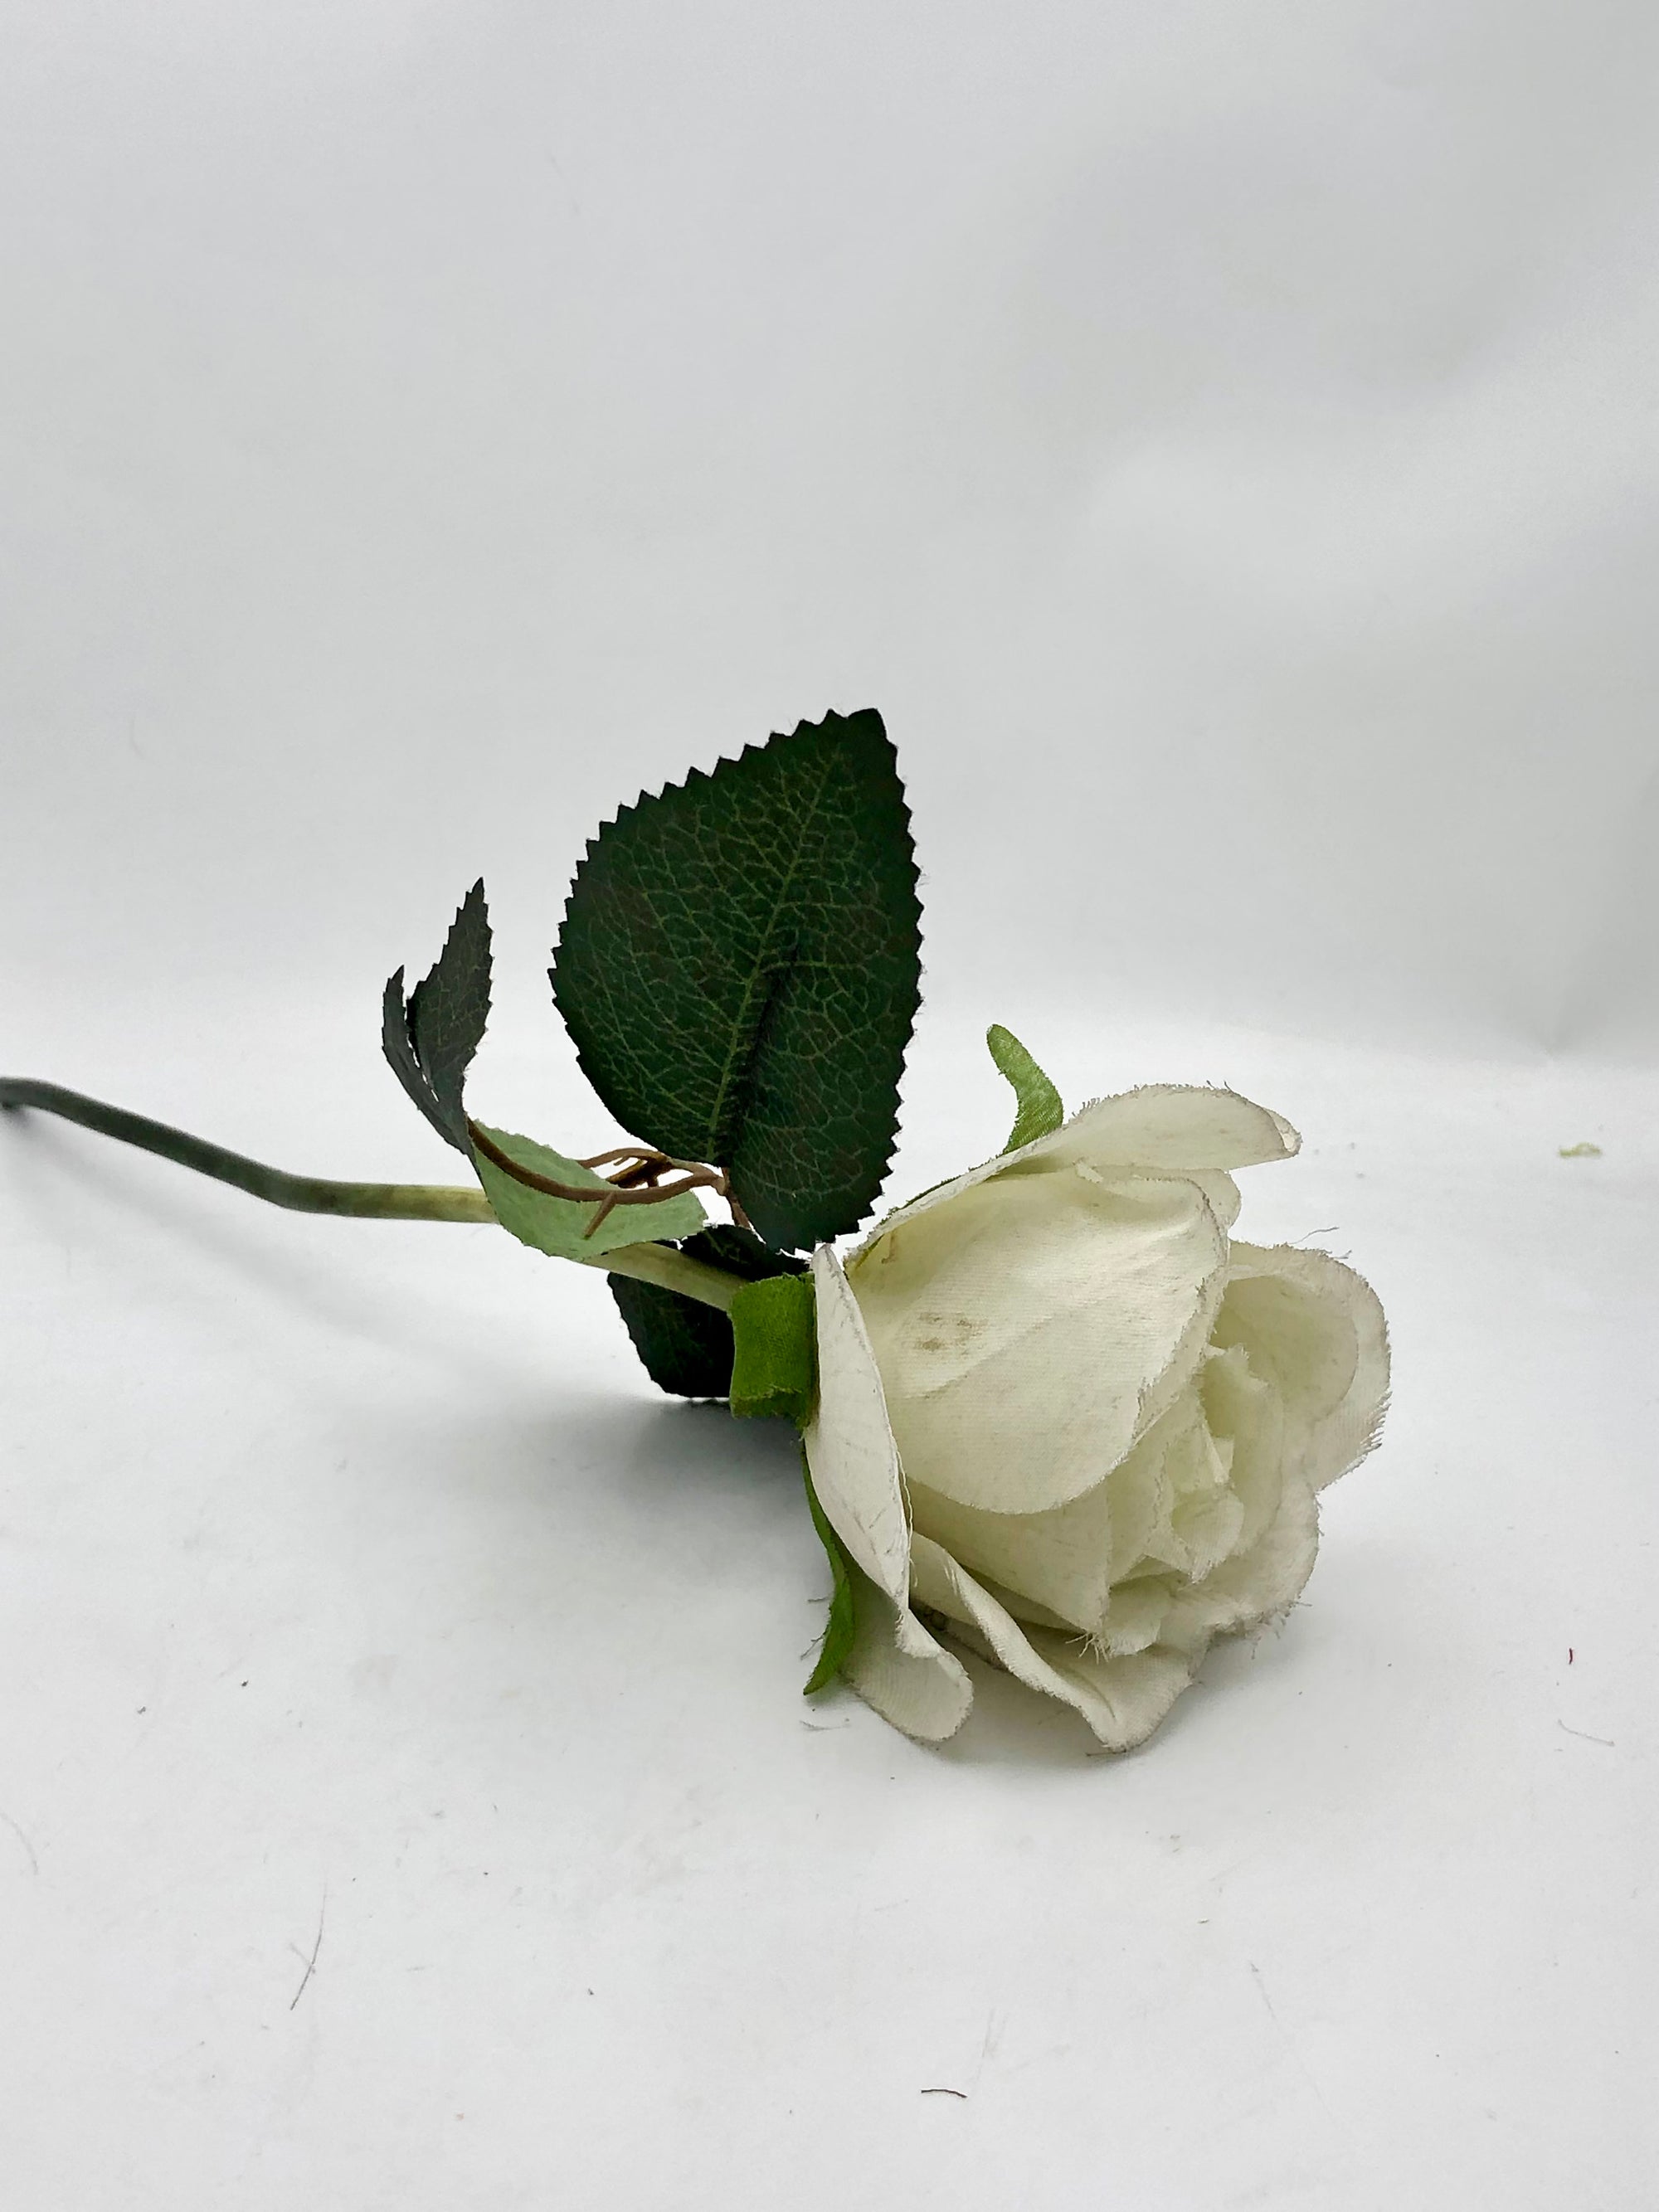 Short White Rose Stalk with Leaves (old stock)